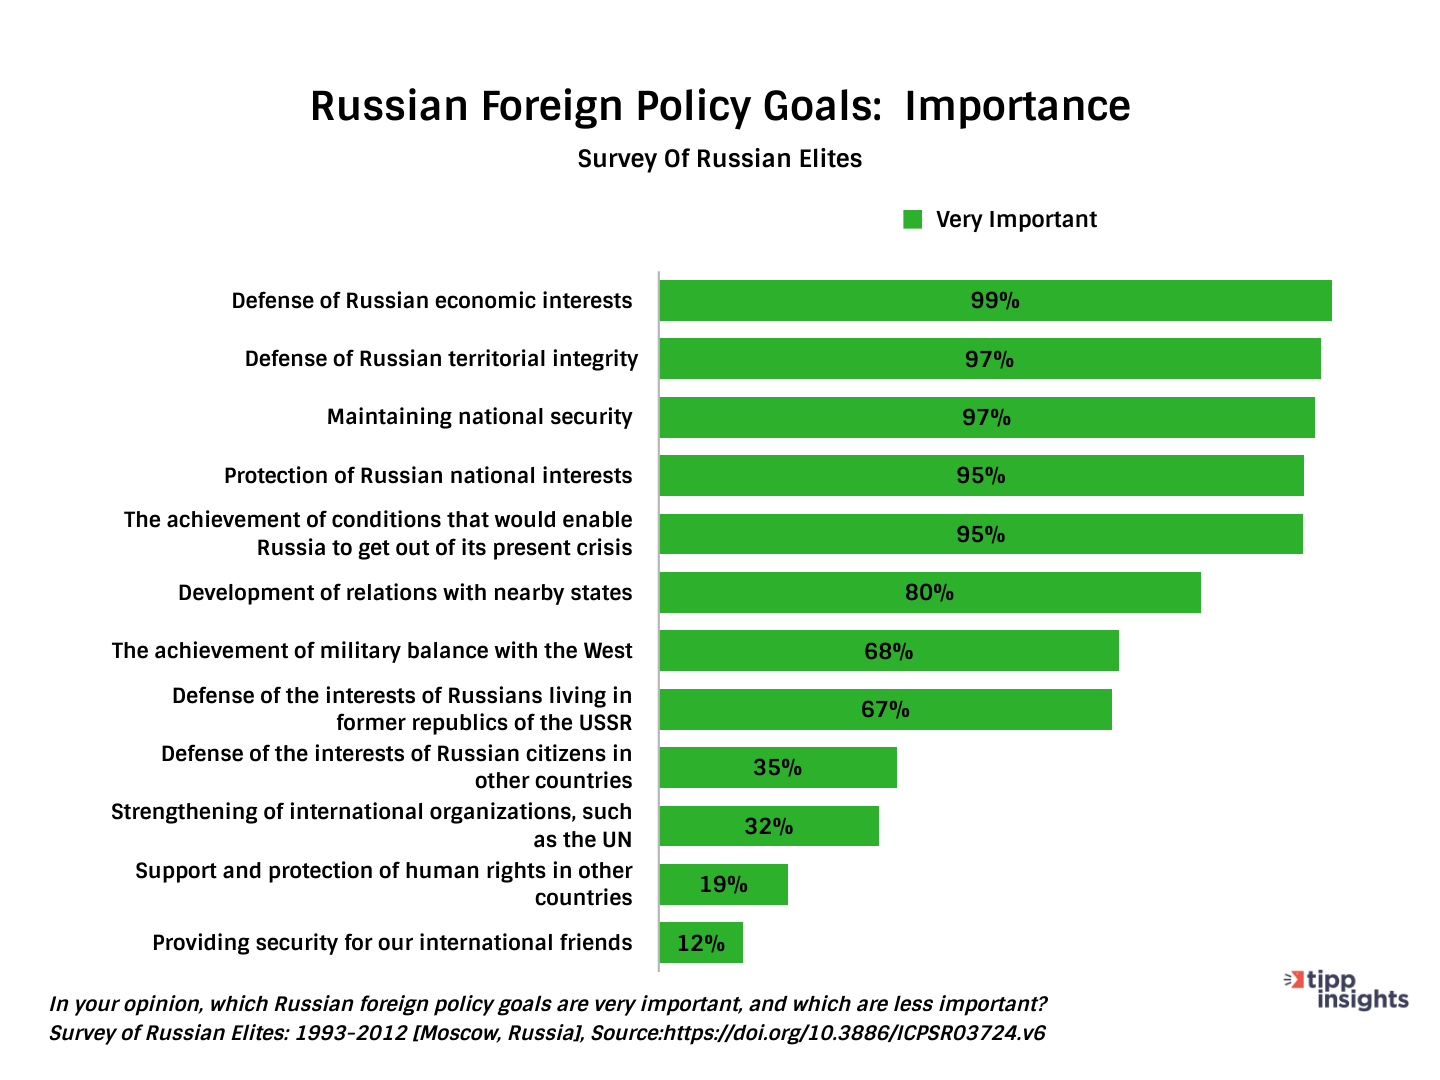 Survey of Russian Elites 1993-2012, which foreign policy goals are most important to Russian oligarchs and elites